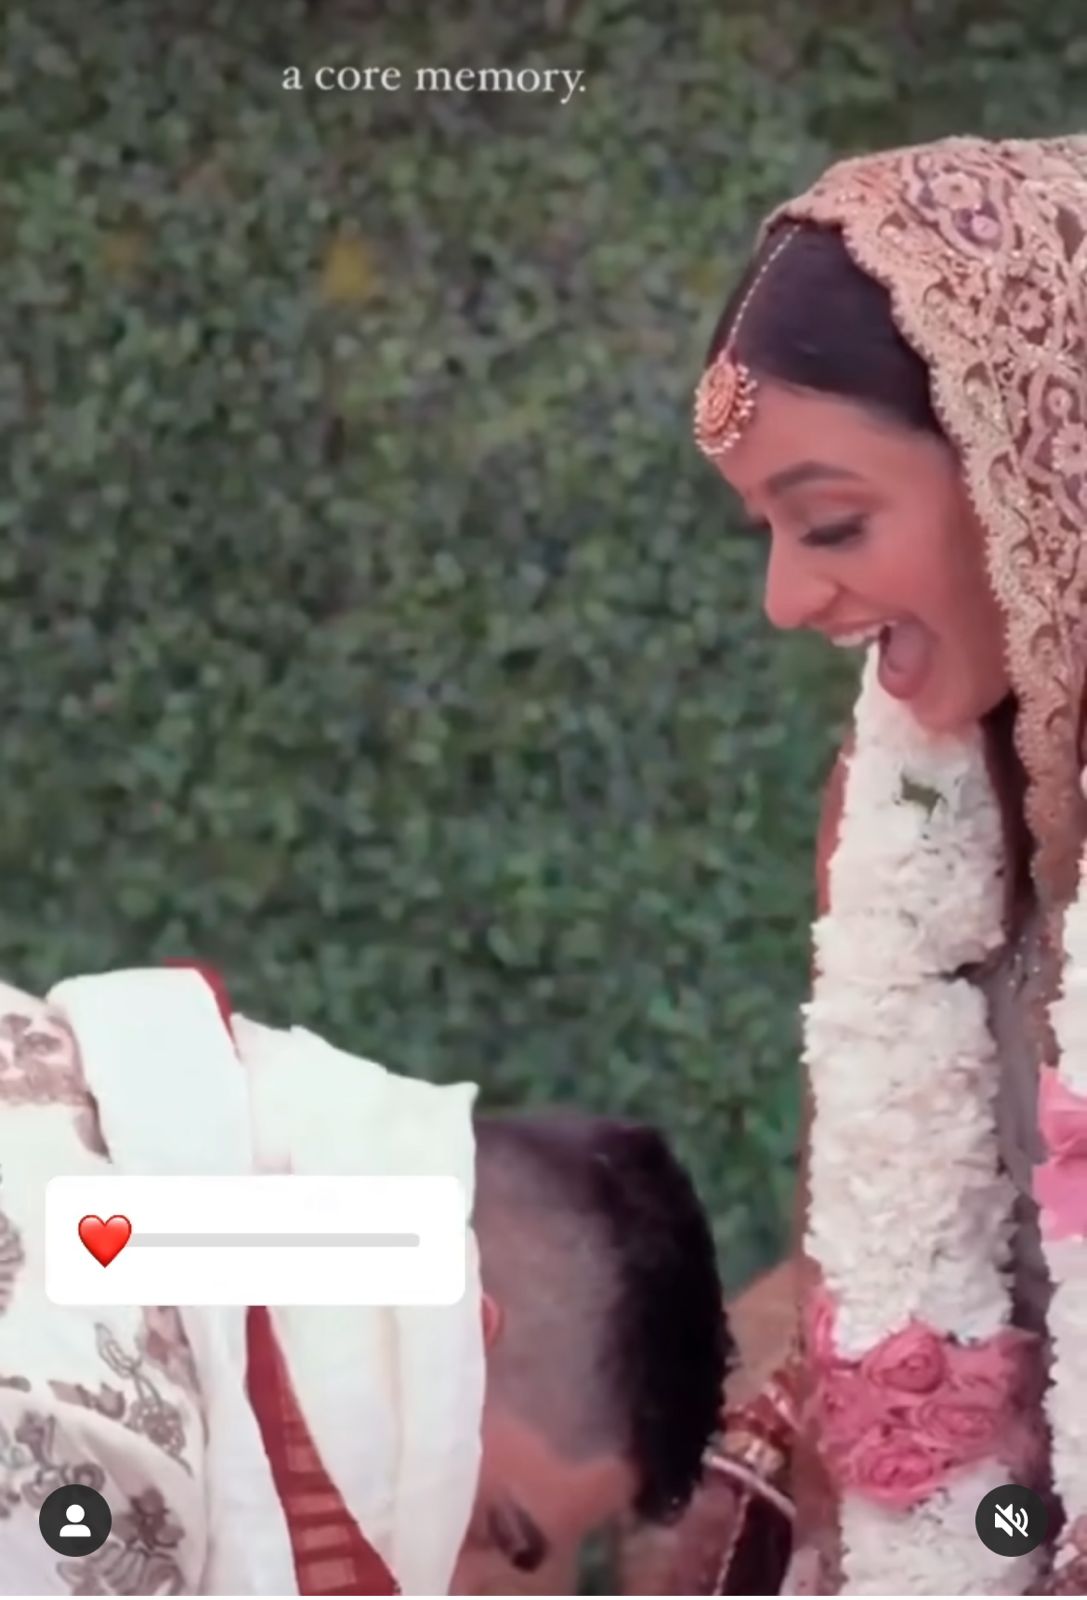 Breaking stereotypes, watch a groom touch his bride's feet during wedding rituals